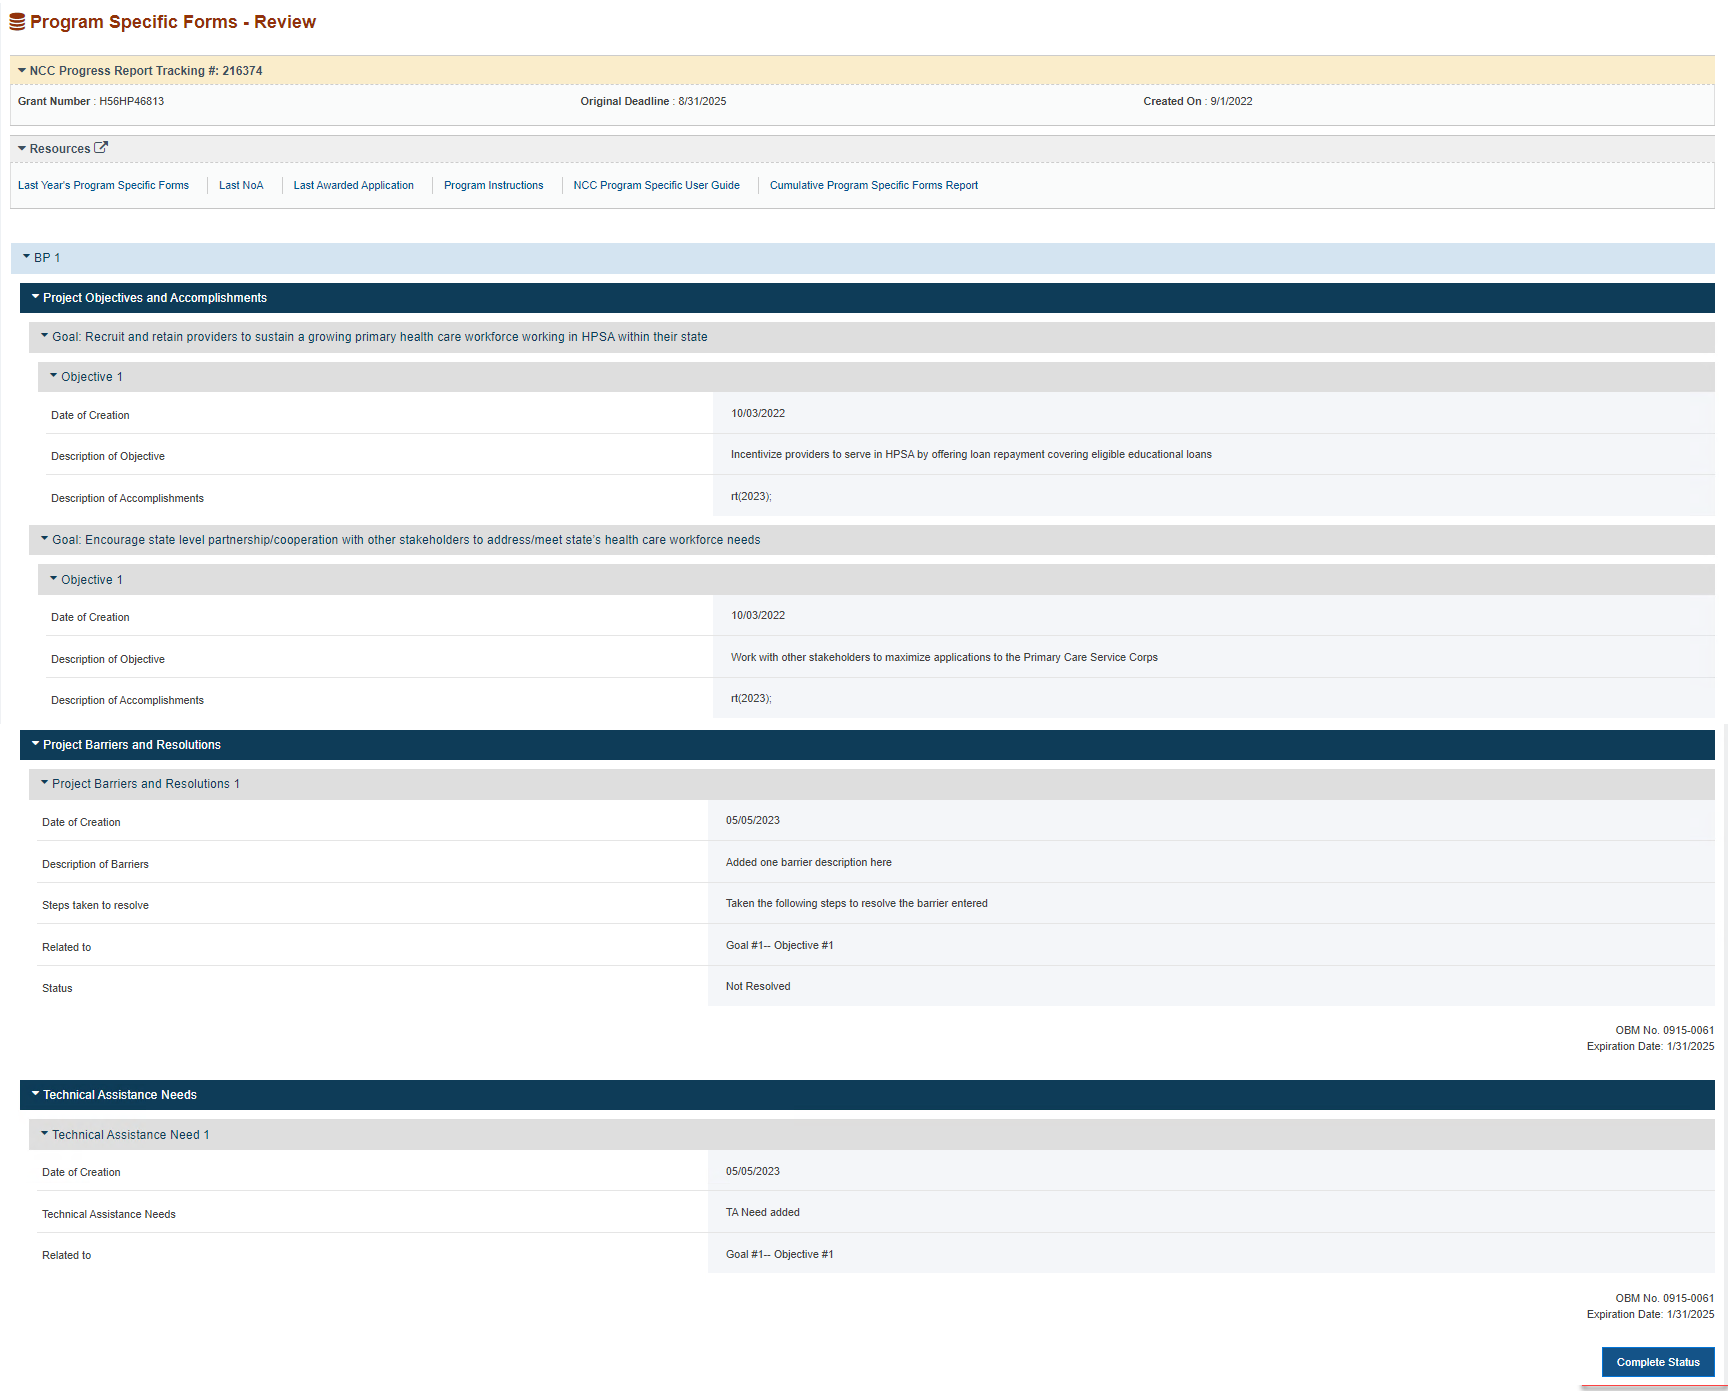 Screenshot of Program Specific Forms review page displayed